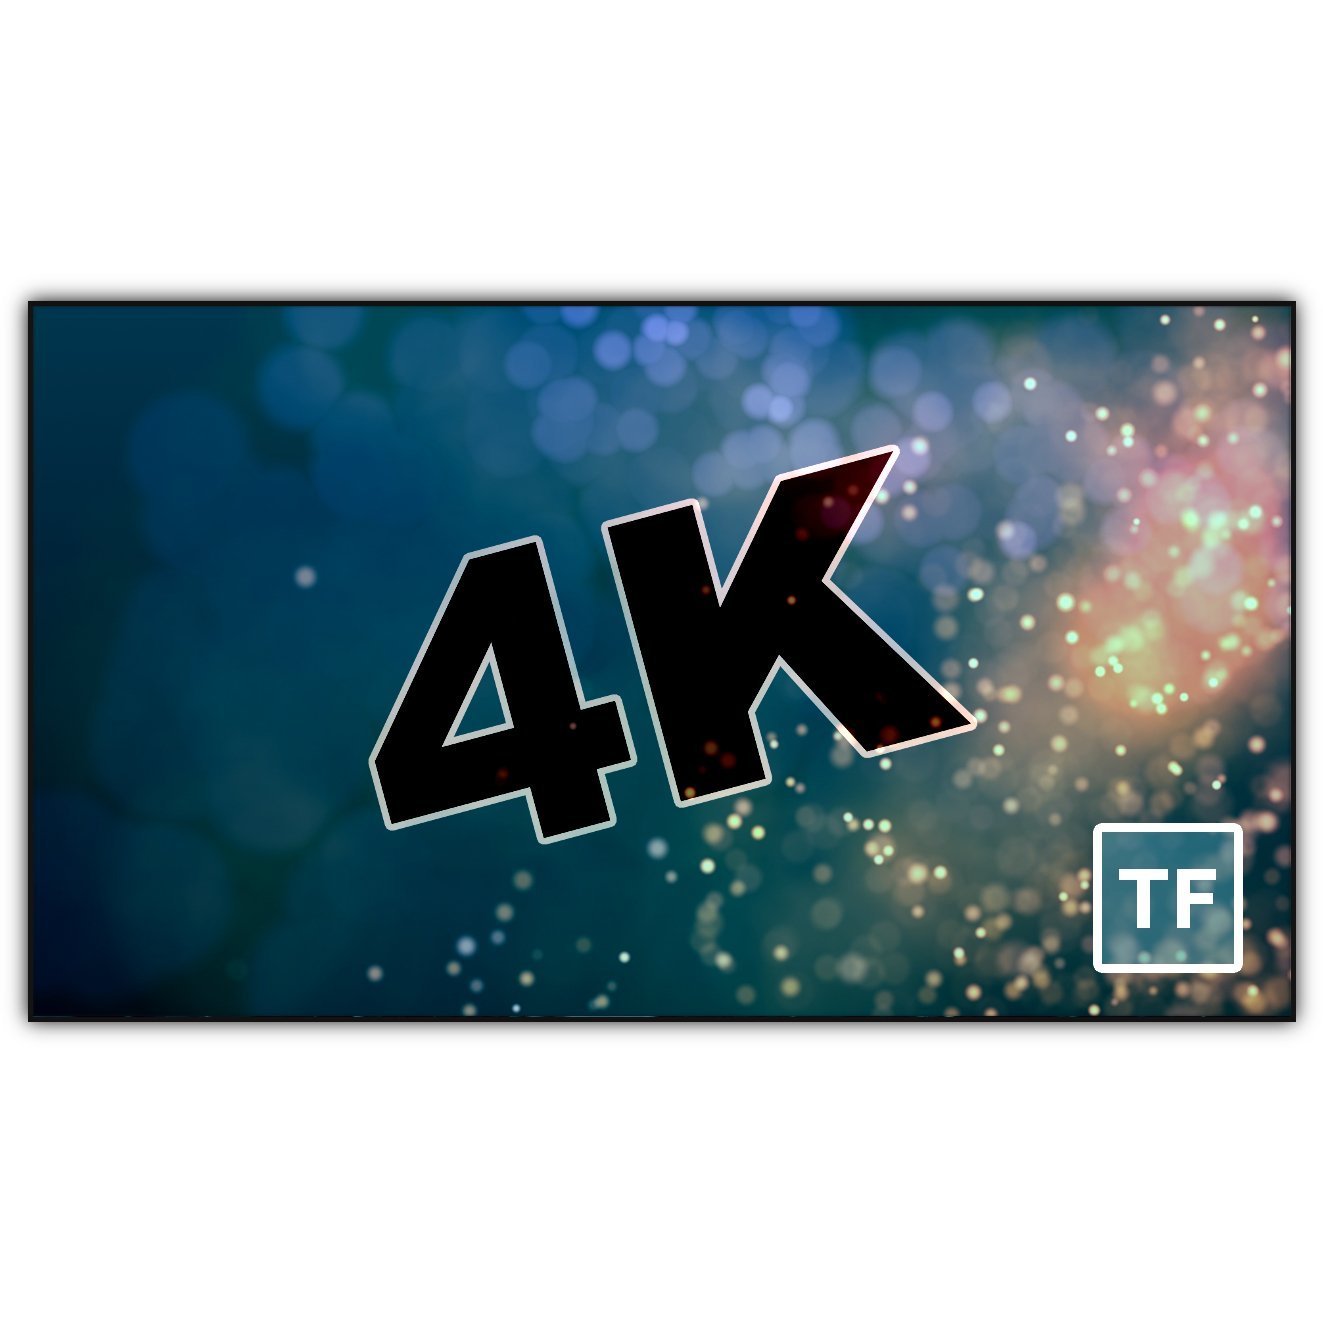 4K Thin Bezel Series, tf Screens from Severtson Screens are an excellent addition to any home theater, venue, conference room, or other location that needs a modern, high-performance projection screen.